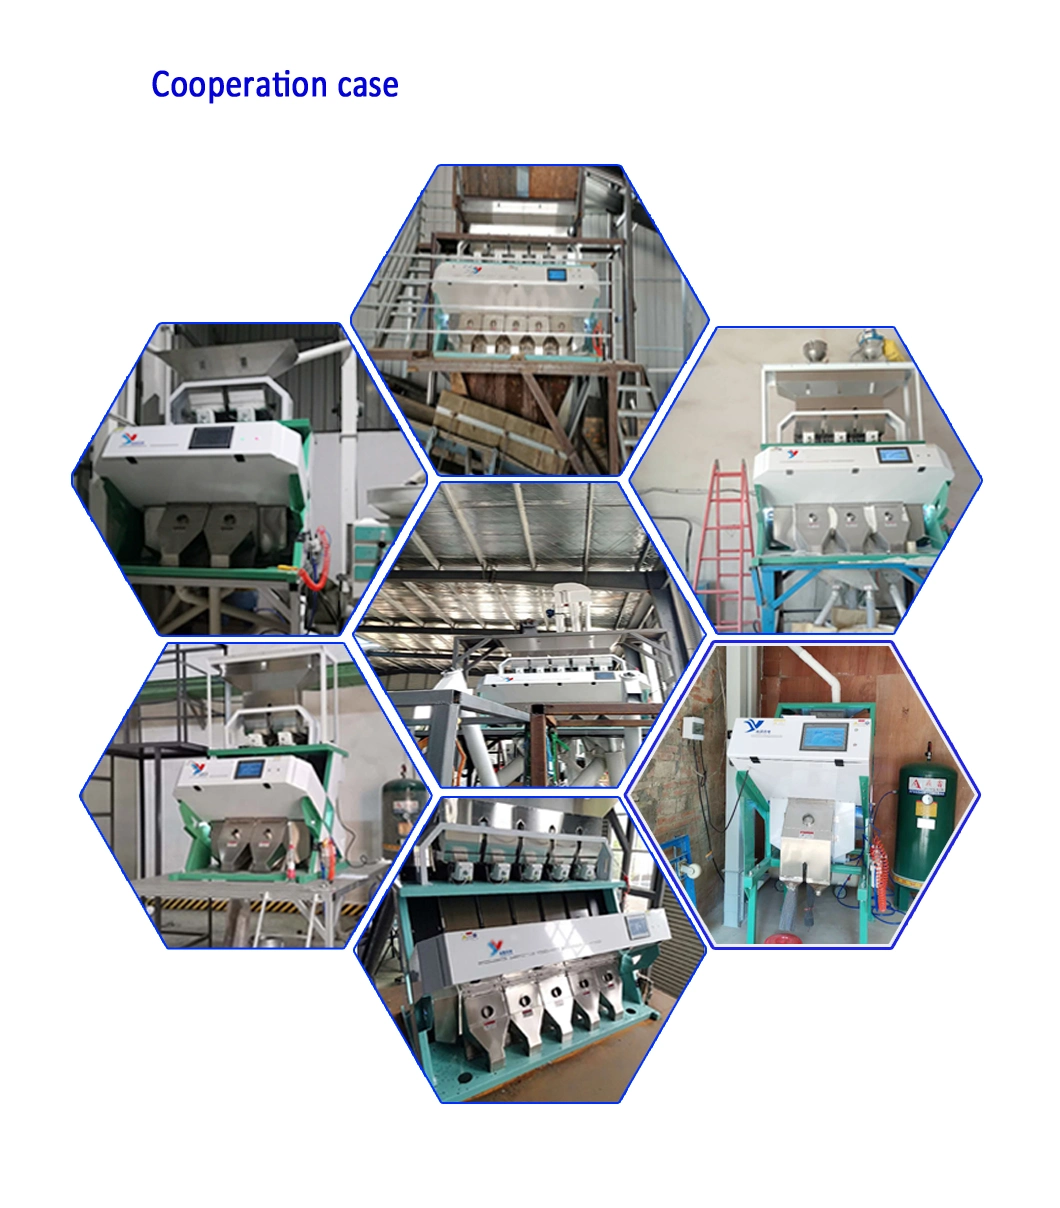 All Kinds of Tea Color Sorting Machine for Shape Selection and Color Selection